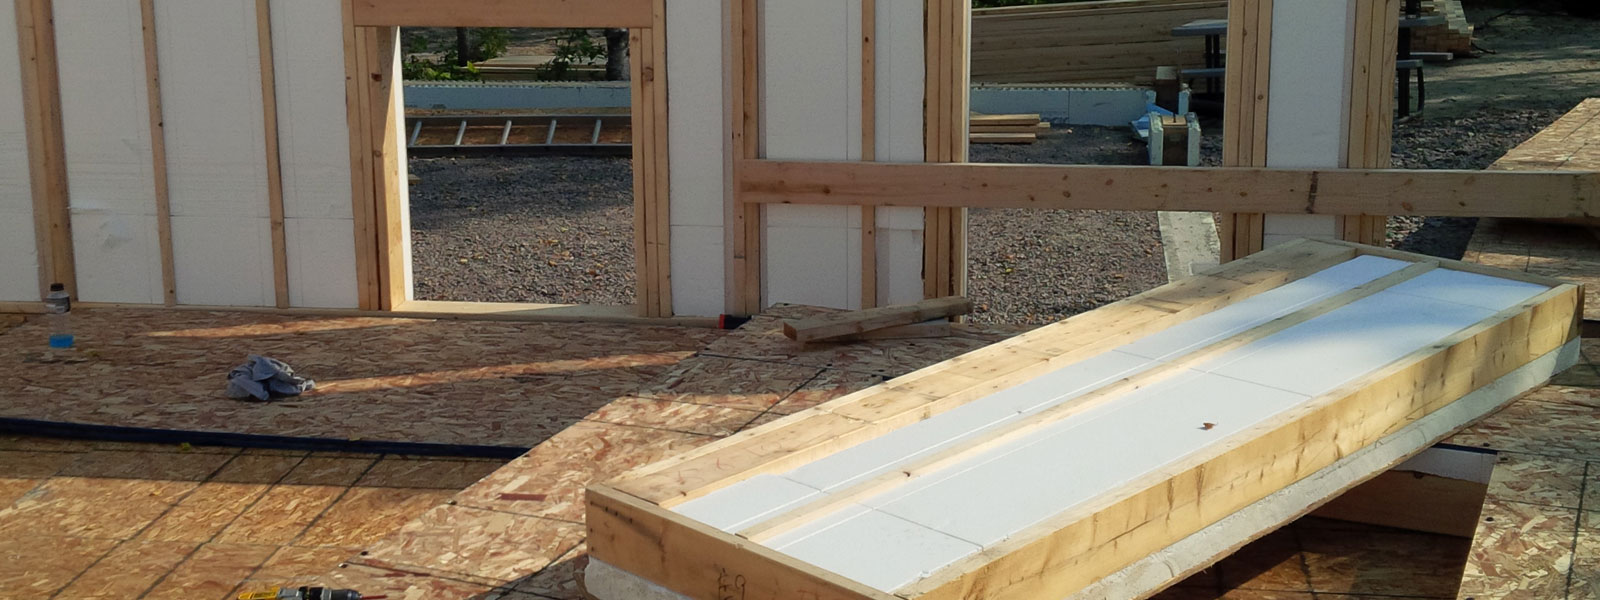 <h2>A Revolutionary New Way to Build GREEN EPS into Walls.<br
/> Frame Custom SUPER-INSULATED Panels on the jobsite in minutes!</h2>